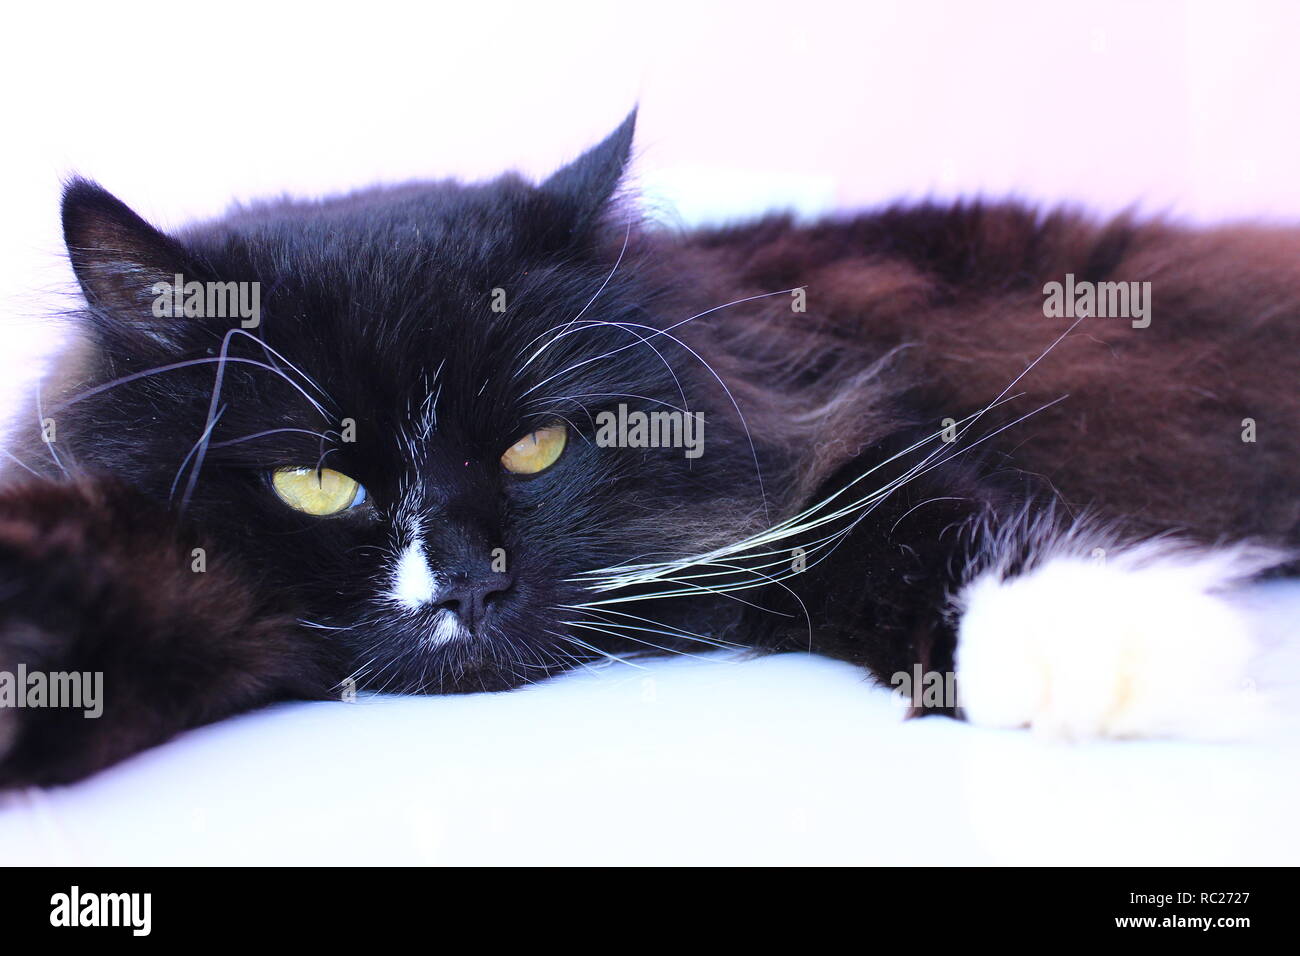 Feline muzzle closeup. Black cat laying on pink tender background. Domestic pet having a rest. Domestic animal Stock Photo